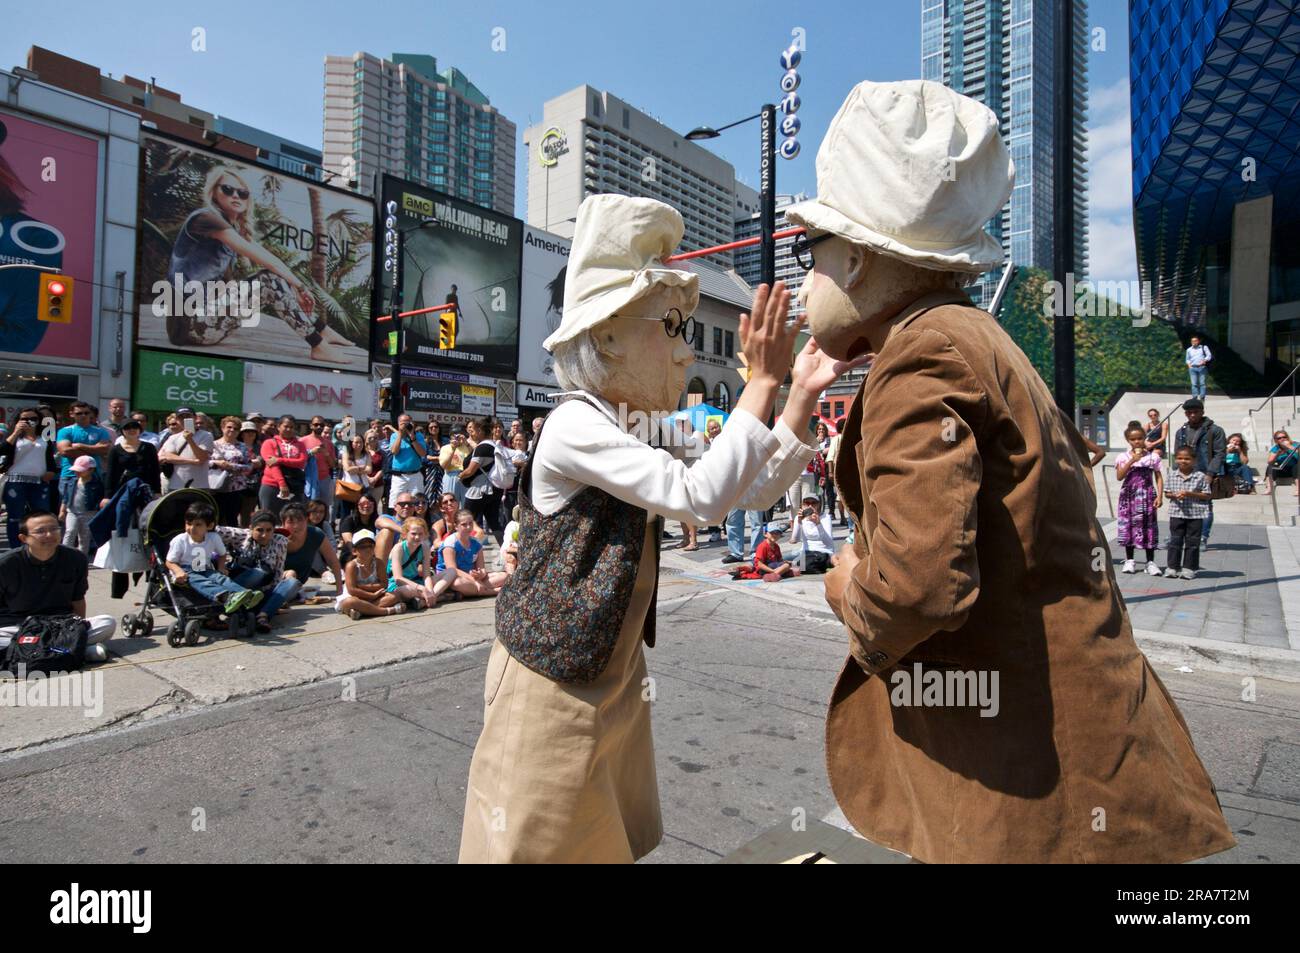 Toronto, Ontario / Canada - Aug 28, 2015: Actor and actress dressed as the seniors play on a street festival Stock Photo